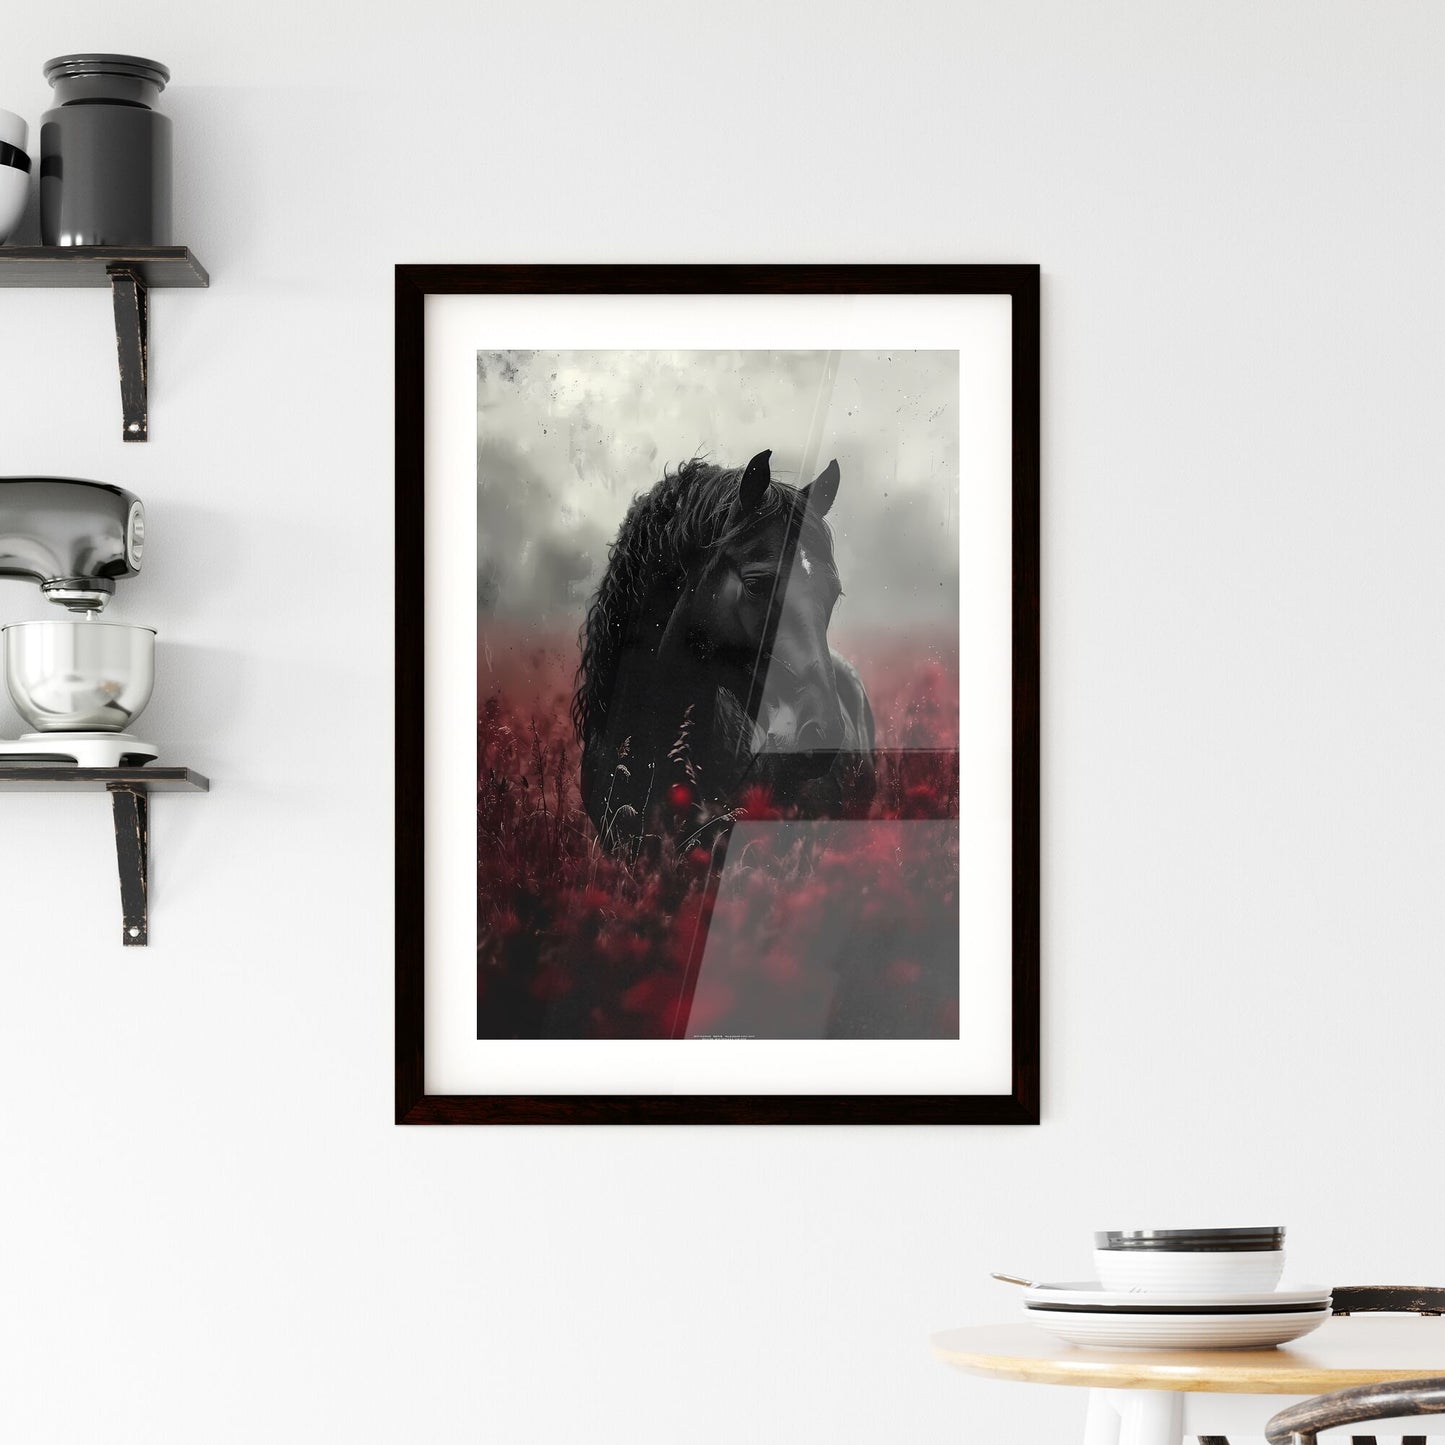 A vintage painting featuring a wild black horse - Art print of a painting of a vineyard Default Title